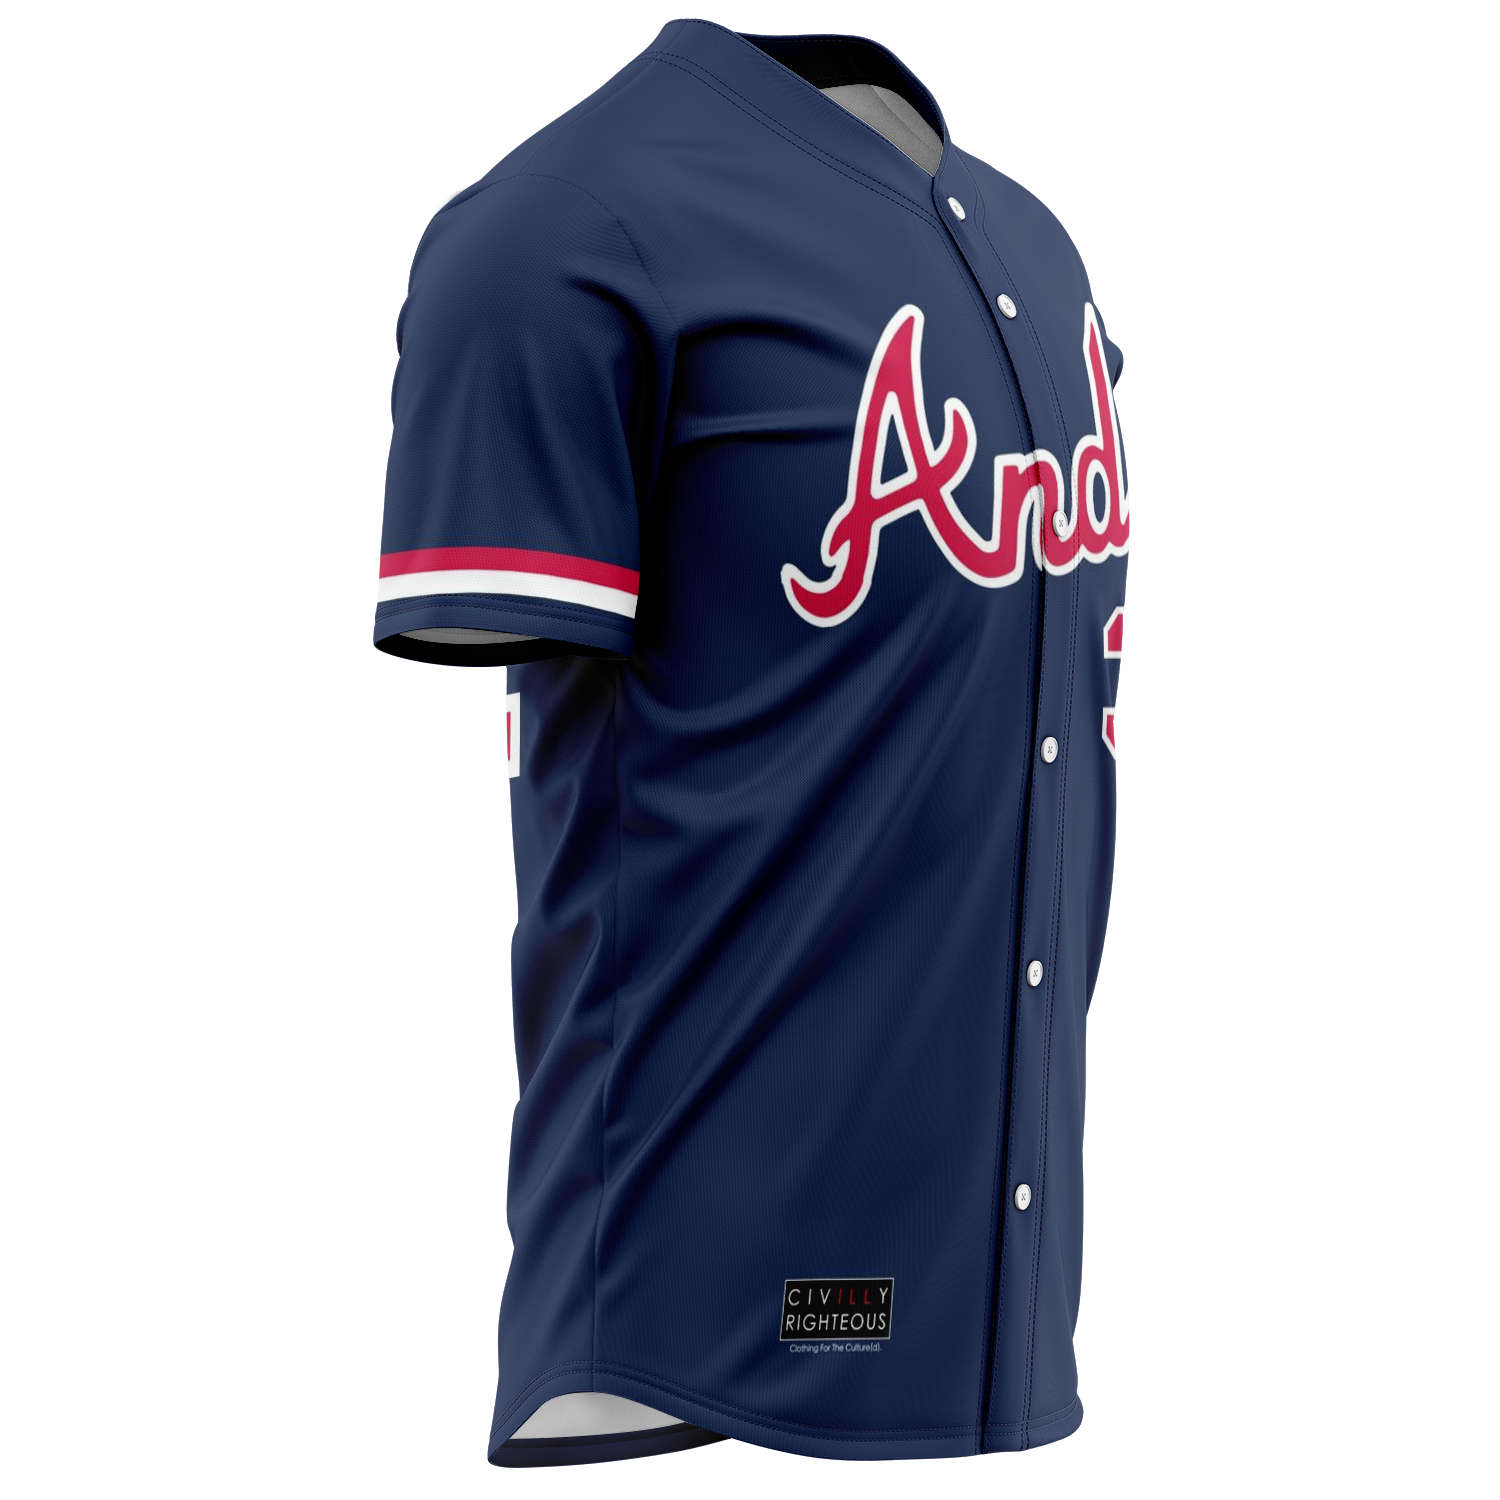 Civilly Righteous Clothing Atliens - Outkast Andre 3000 Atlanta Braves Parody - Pullover Jersey L / White Seams / 6 oz.